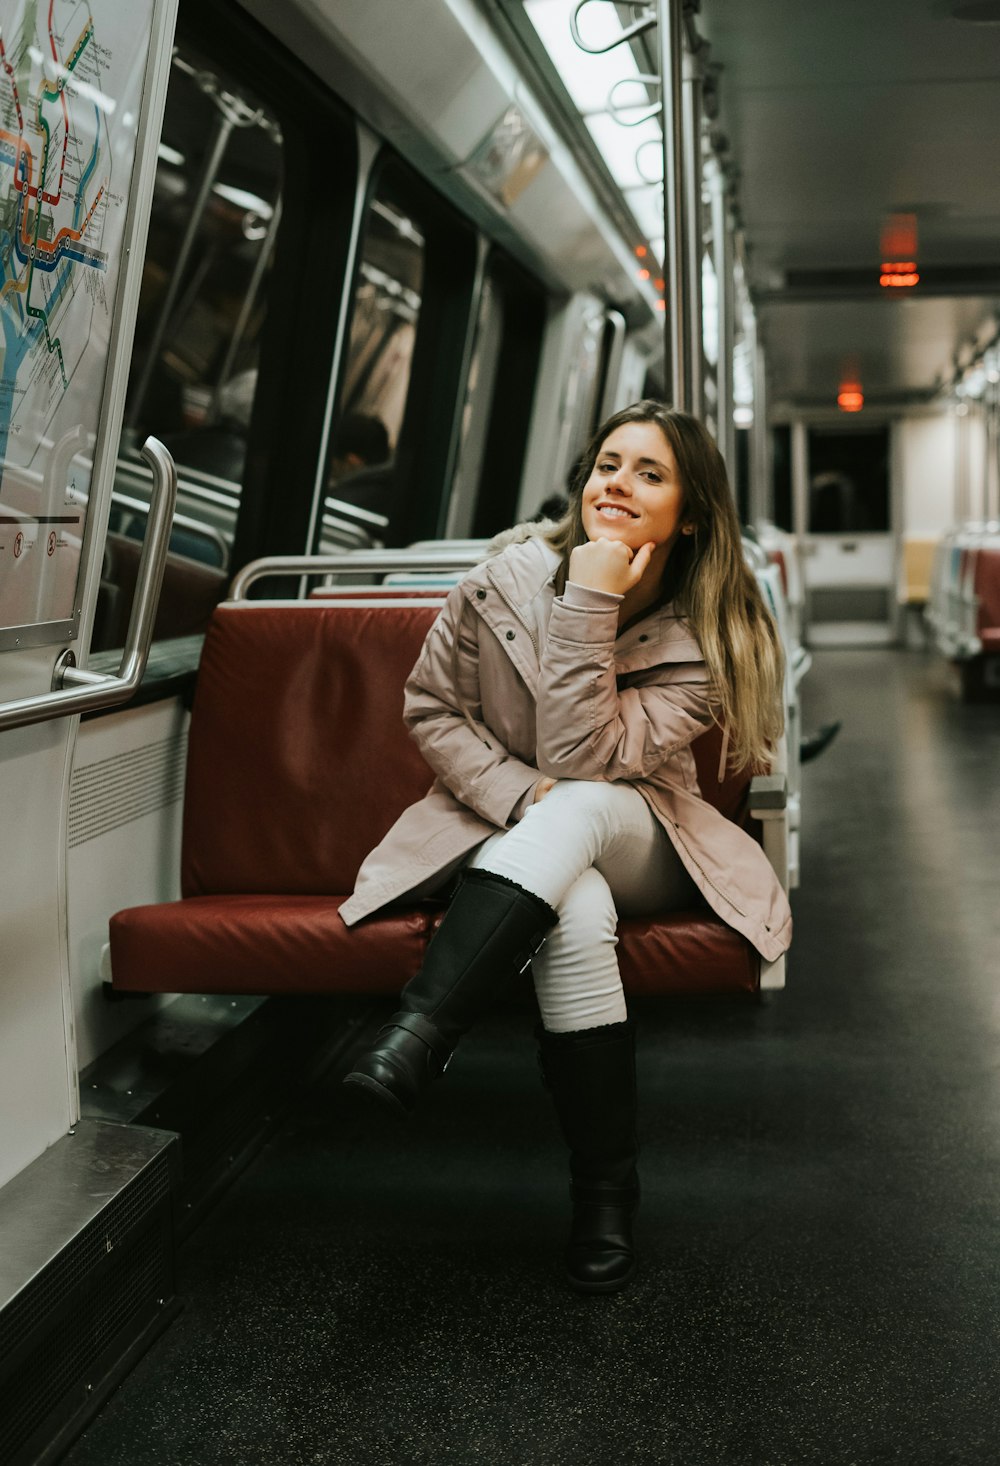 woman in coat sitting on train bench